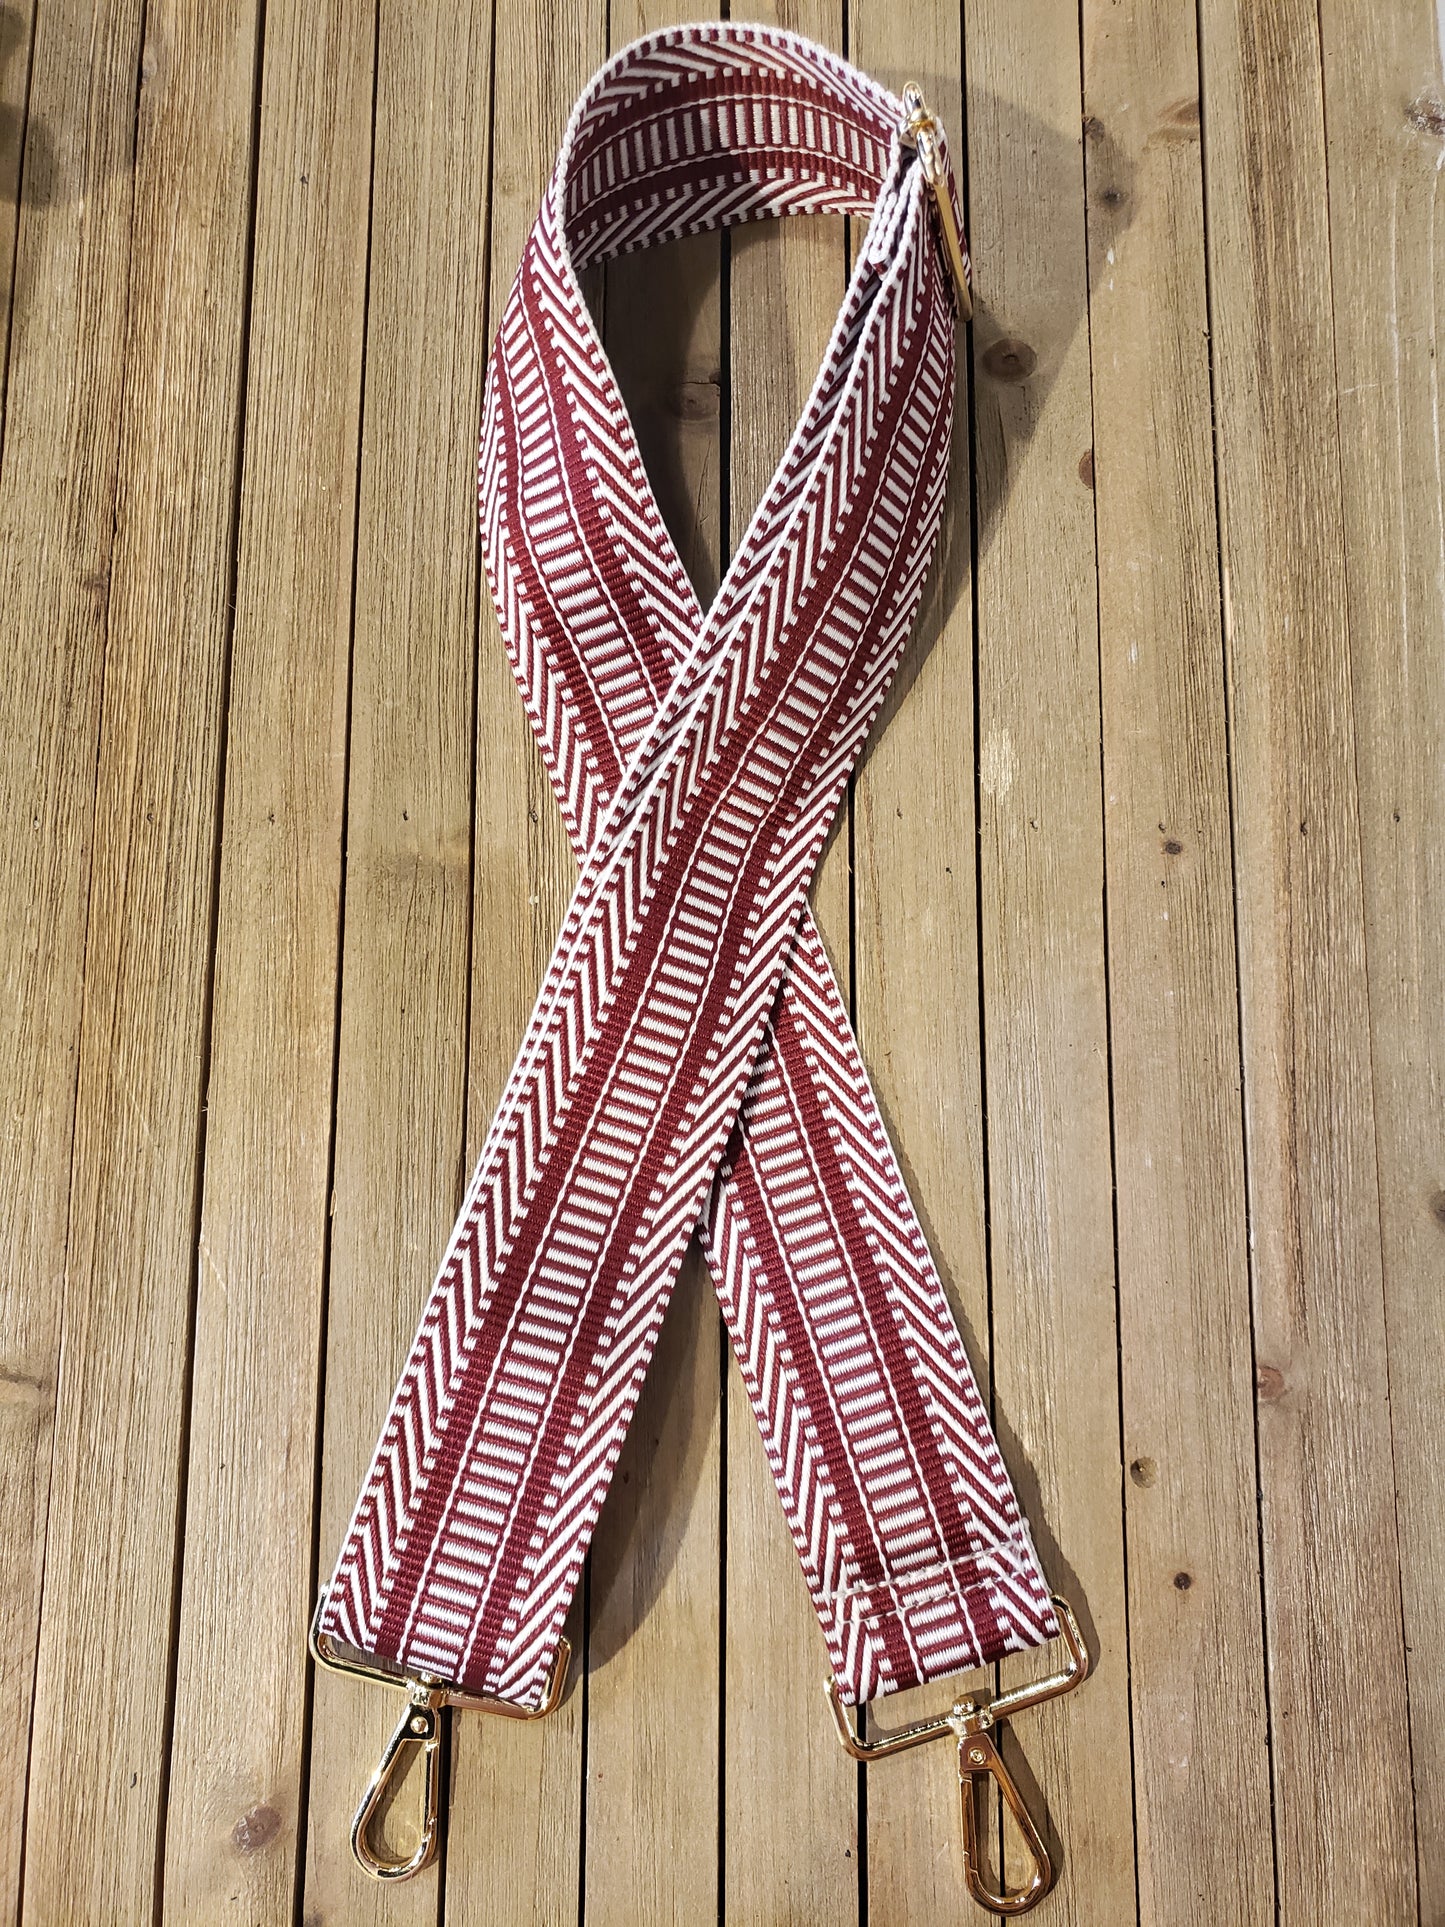 2" Adjustable Embroidered Bag Strap - Maroon and White Stripes